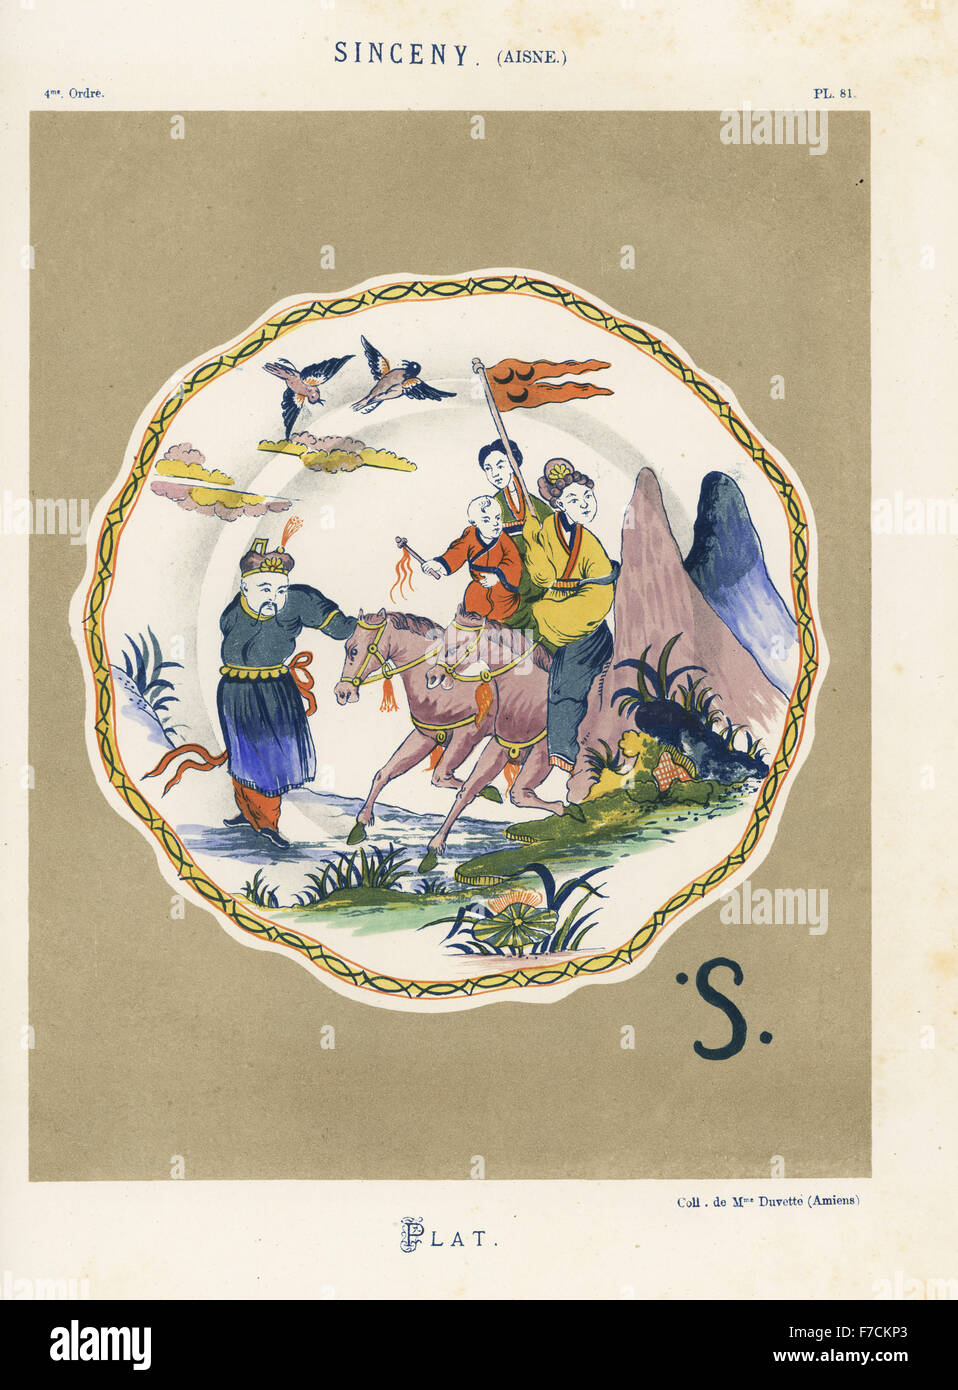 Plate from Sinceny, France, with Chinese family on horseback with pennant, surrounded by birds, mountains and flowers. Hand-finished chromolithograph from Ris Paquot's General History of Ancient French and Foreign Glazed Pottery, Chez l'Auteur, Paris, 1874. Stock Photo